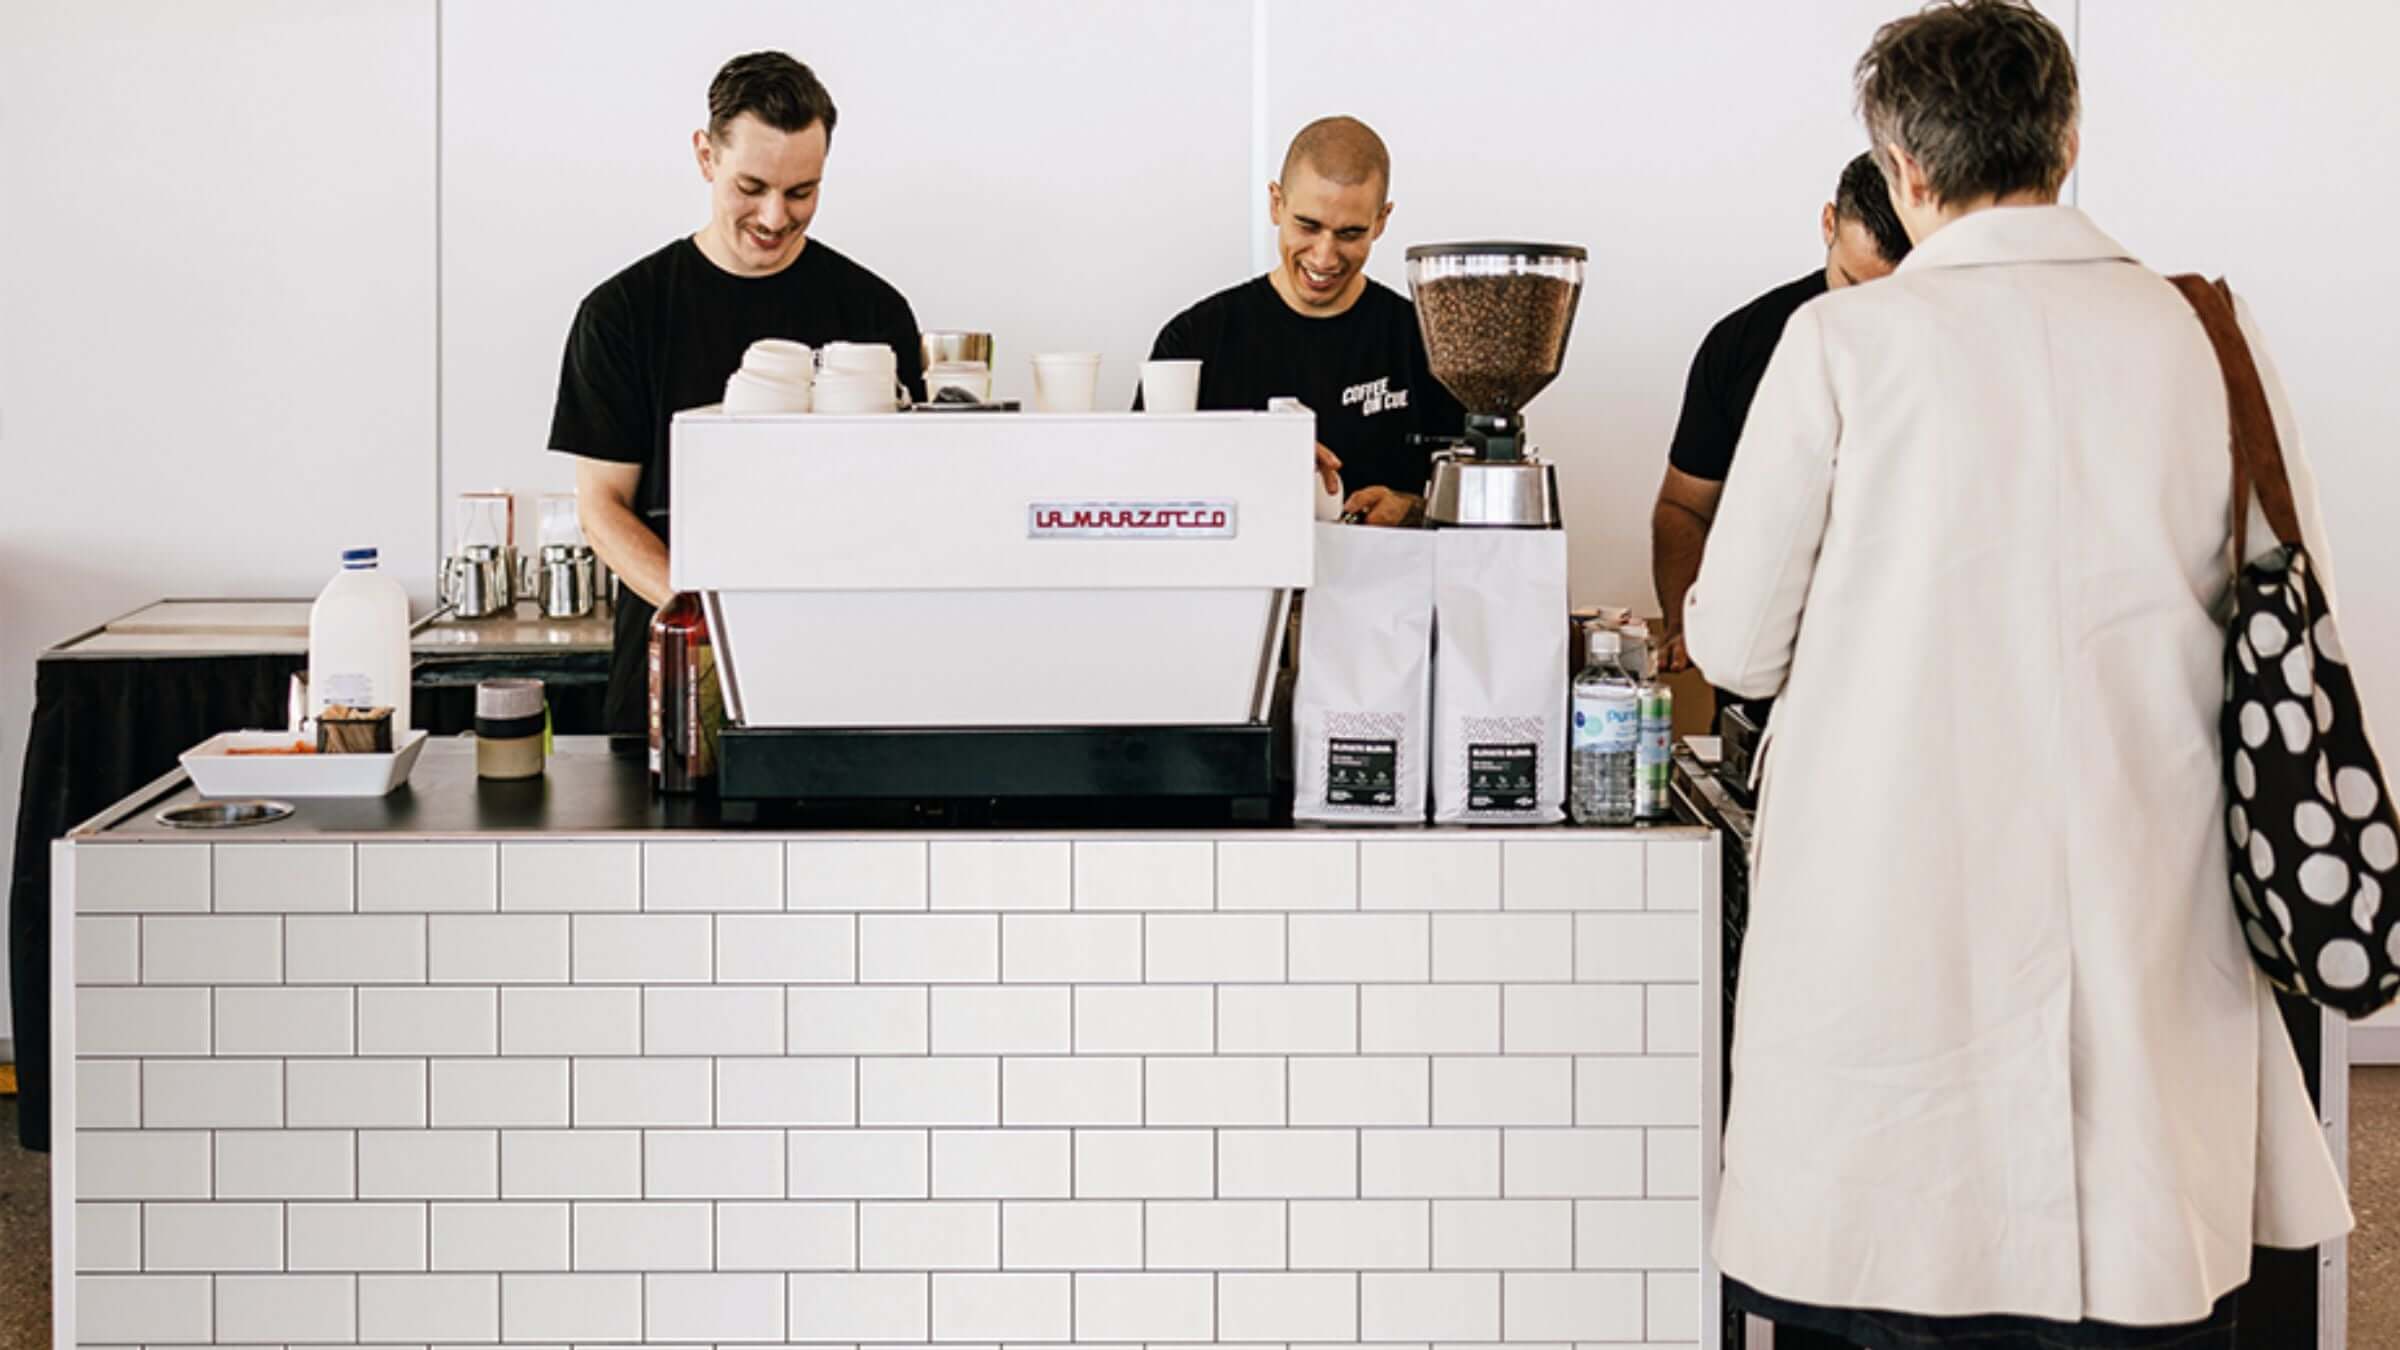 Coffee on Cue baristas serving attendees at Sydney market event